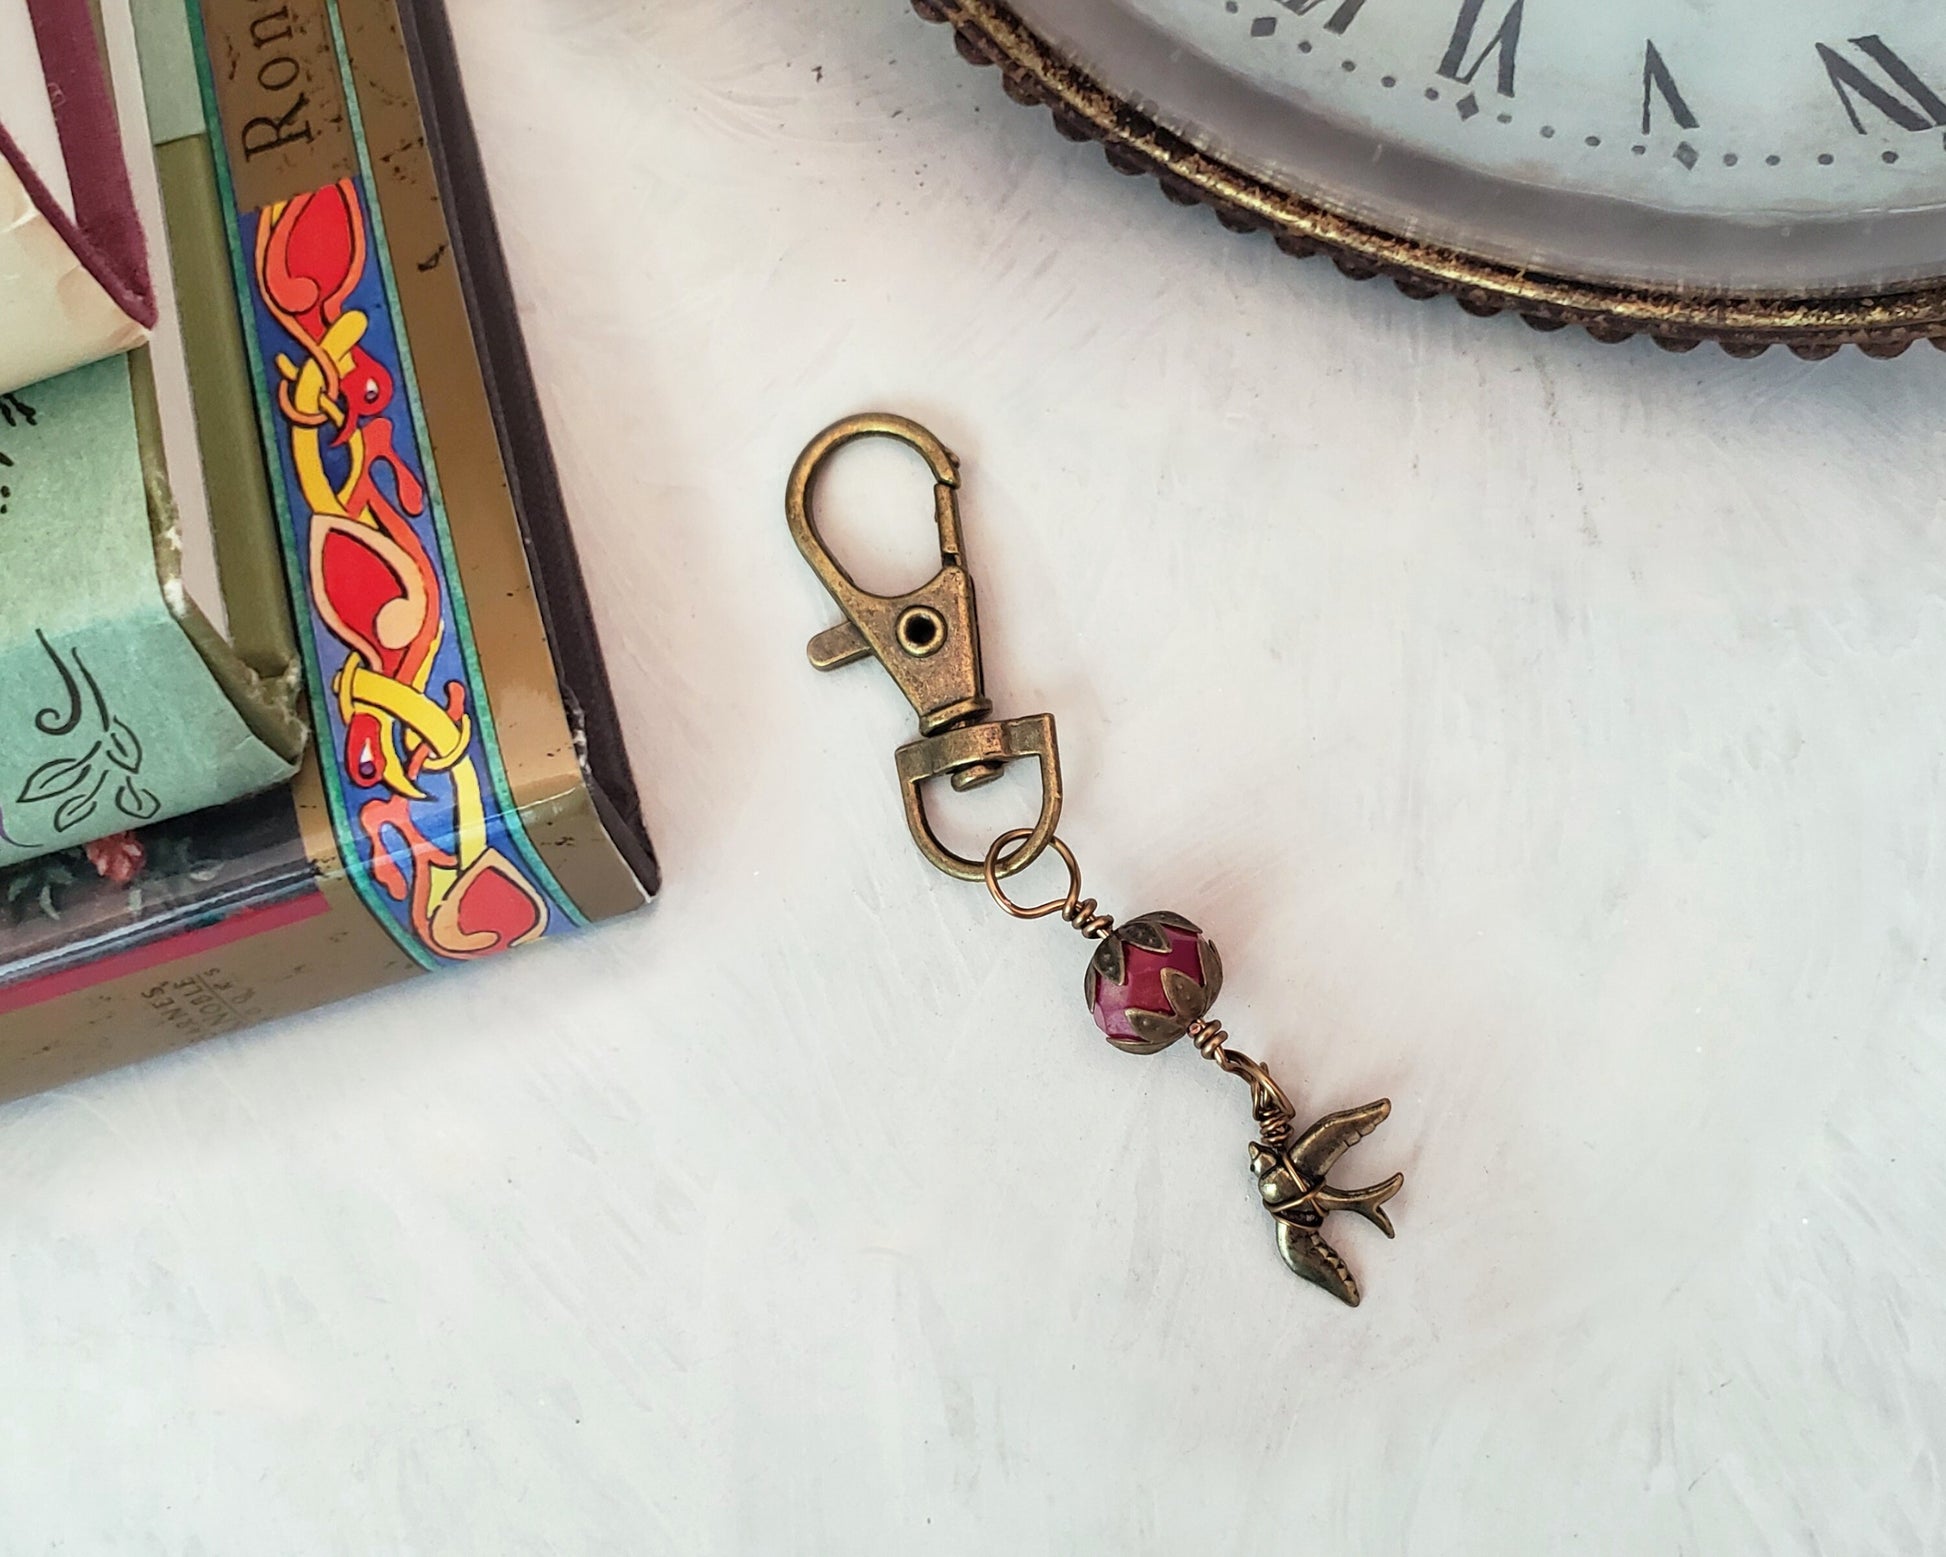 Wire Wrapped Clip or Purse Charm in Antique Bronze, Pink with Bird Charm, Cellphone Charm, Choice of Colors and Metals